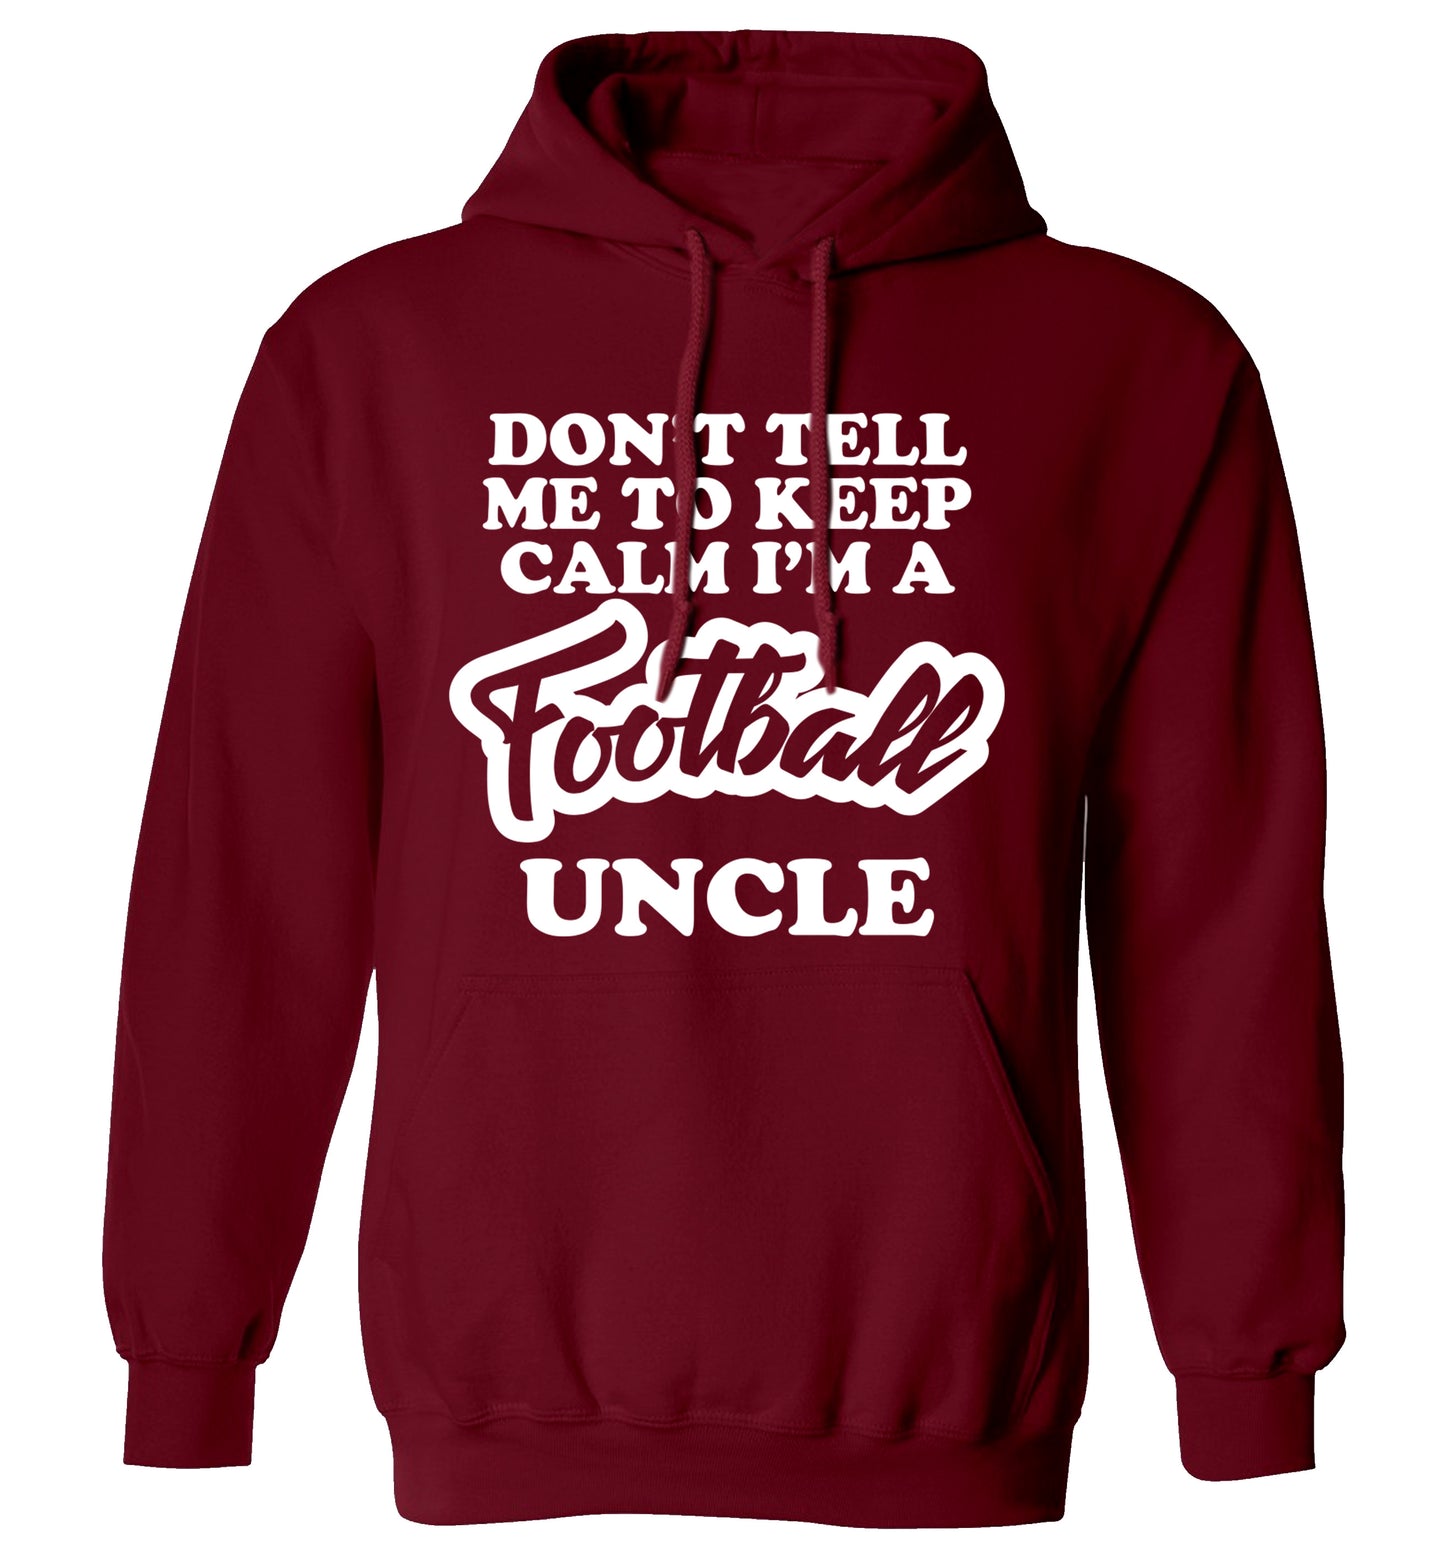 Don't tell me to keep calm I'm a football uncle adults unisexmaroon hoodie 2XL